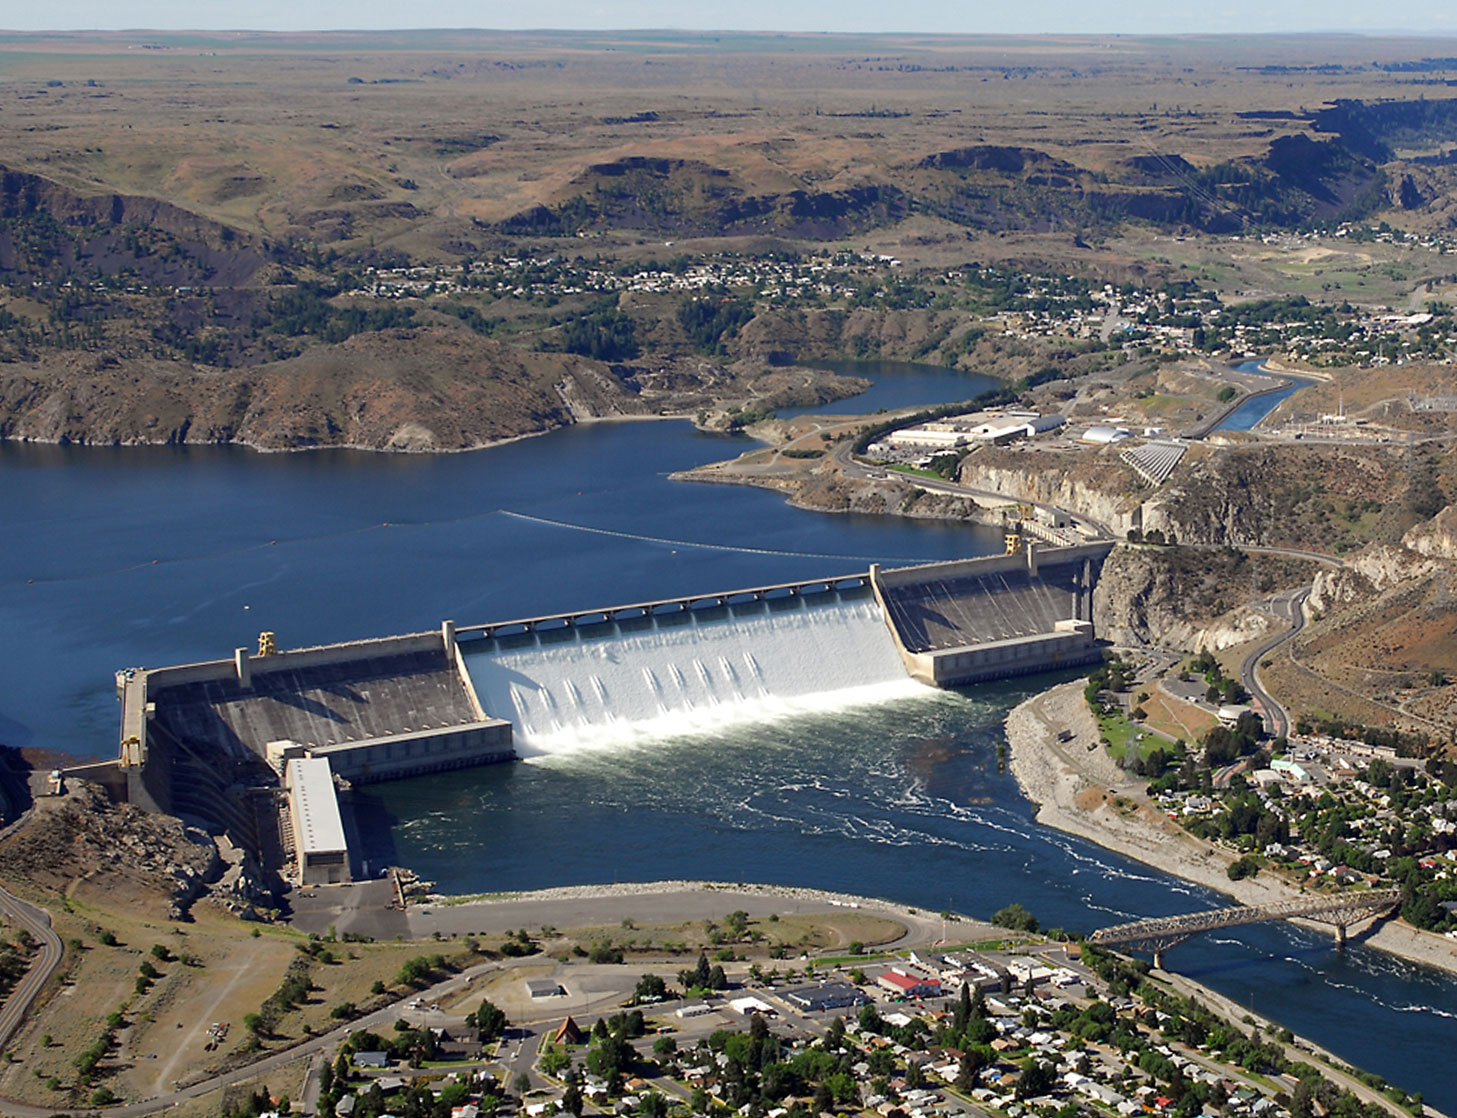 Photograph of Grand Coulee Dam on the Columbia River in Washington state. The dam is a concrete structure holding back water in a reservoir. Water is flowering over the spillway into the river below. The surrounding landscape is dry with low hills.